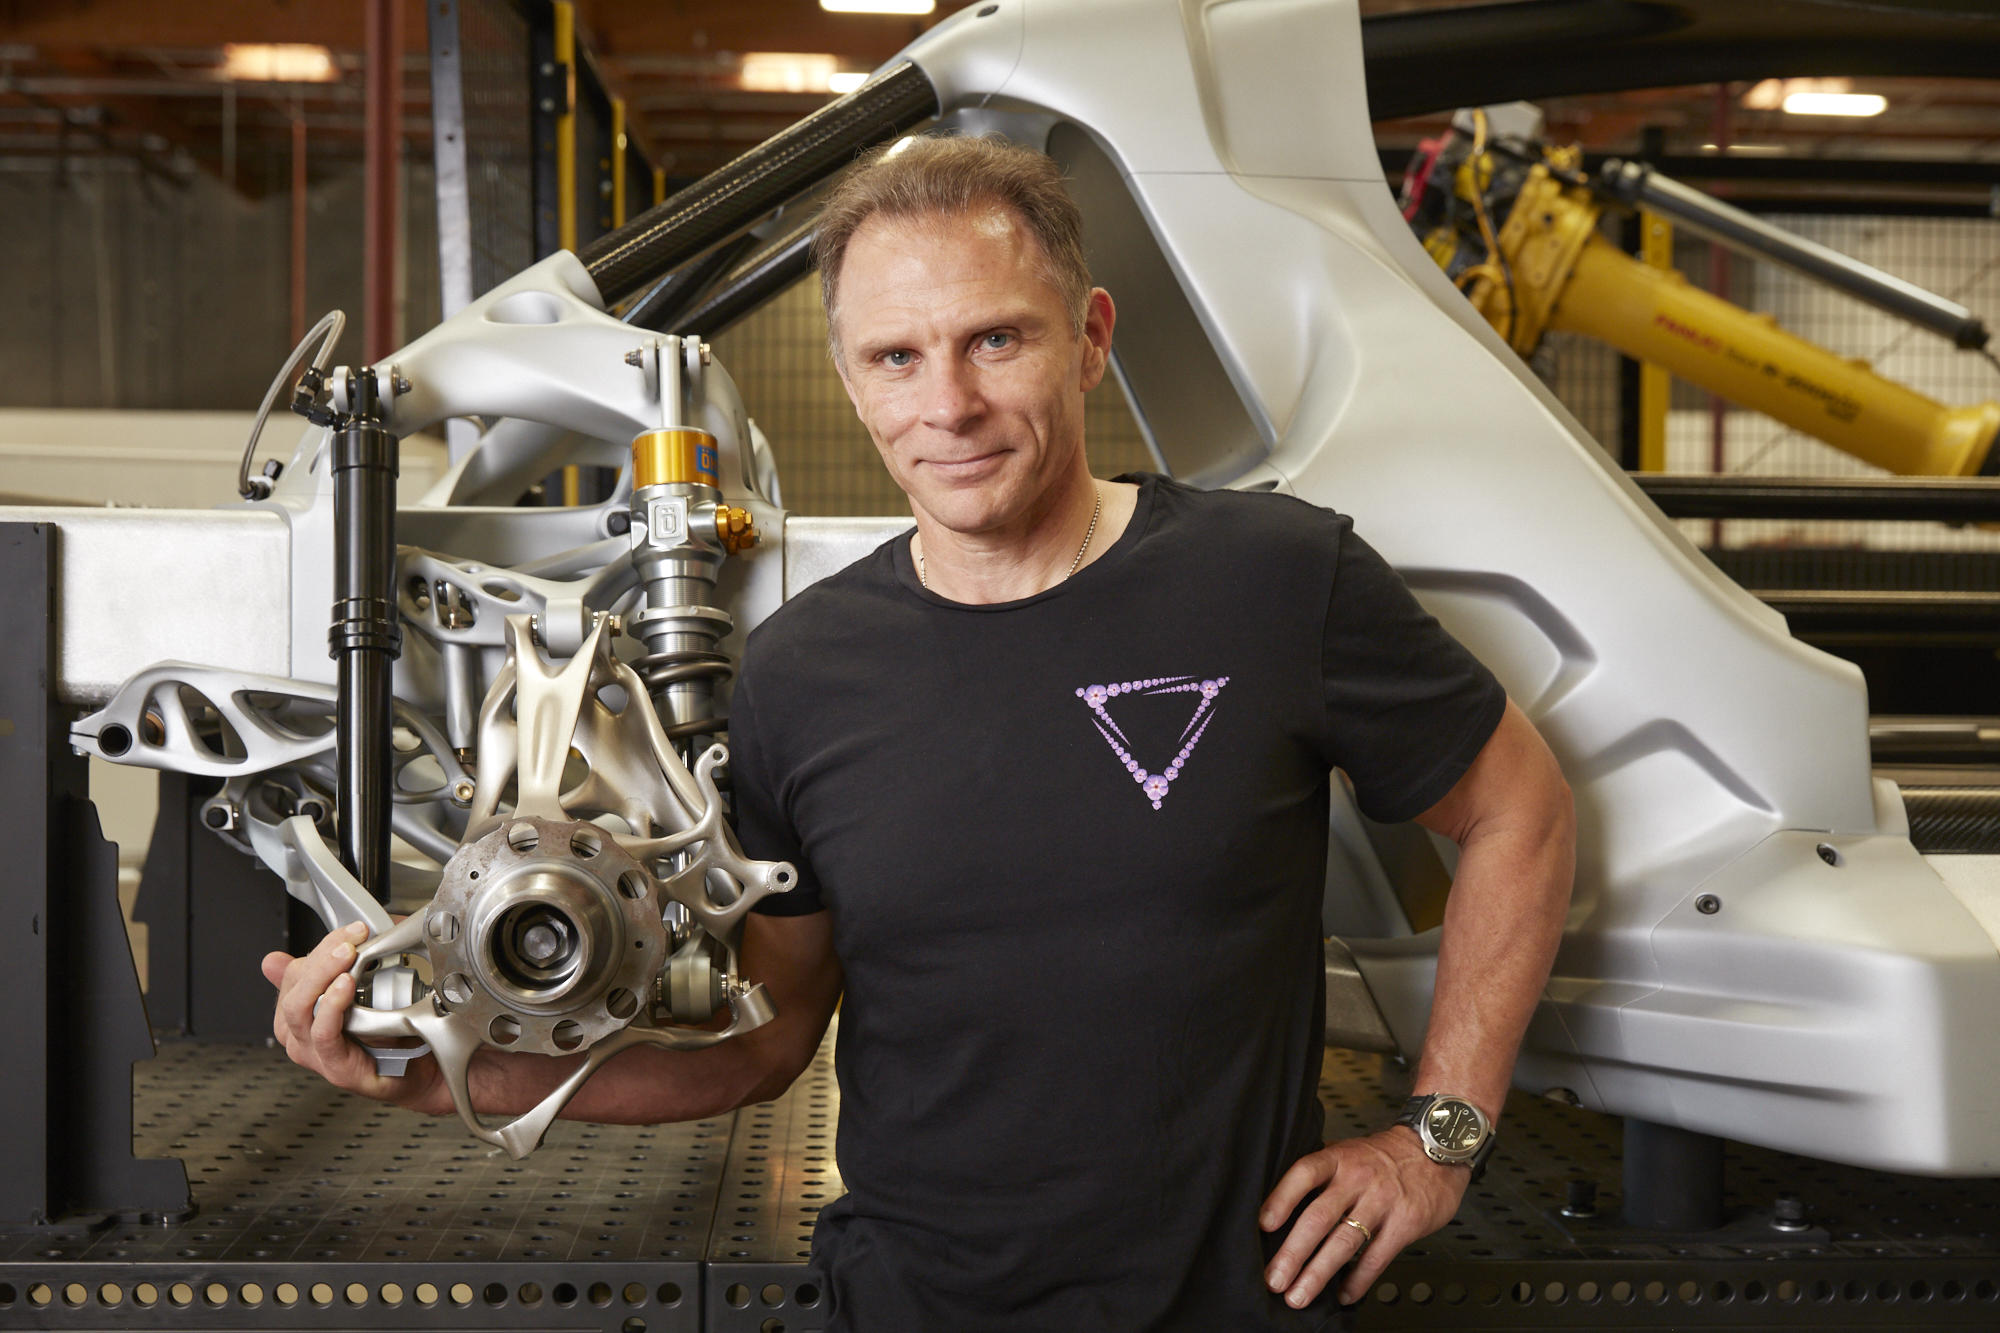 Divergent Technologies founder and CEO Kevin Czinger with an additively manufactured component for the Czinger hypercar